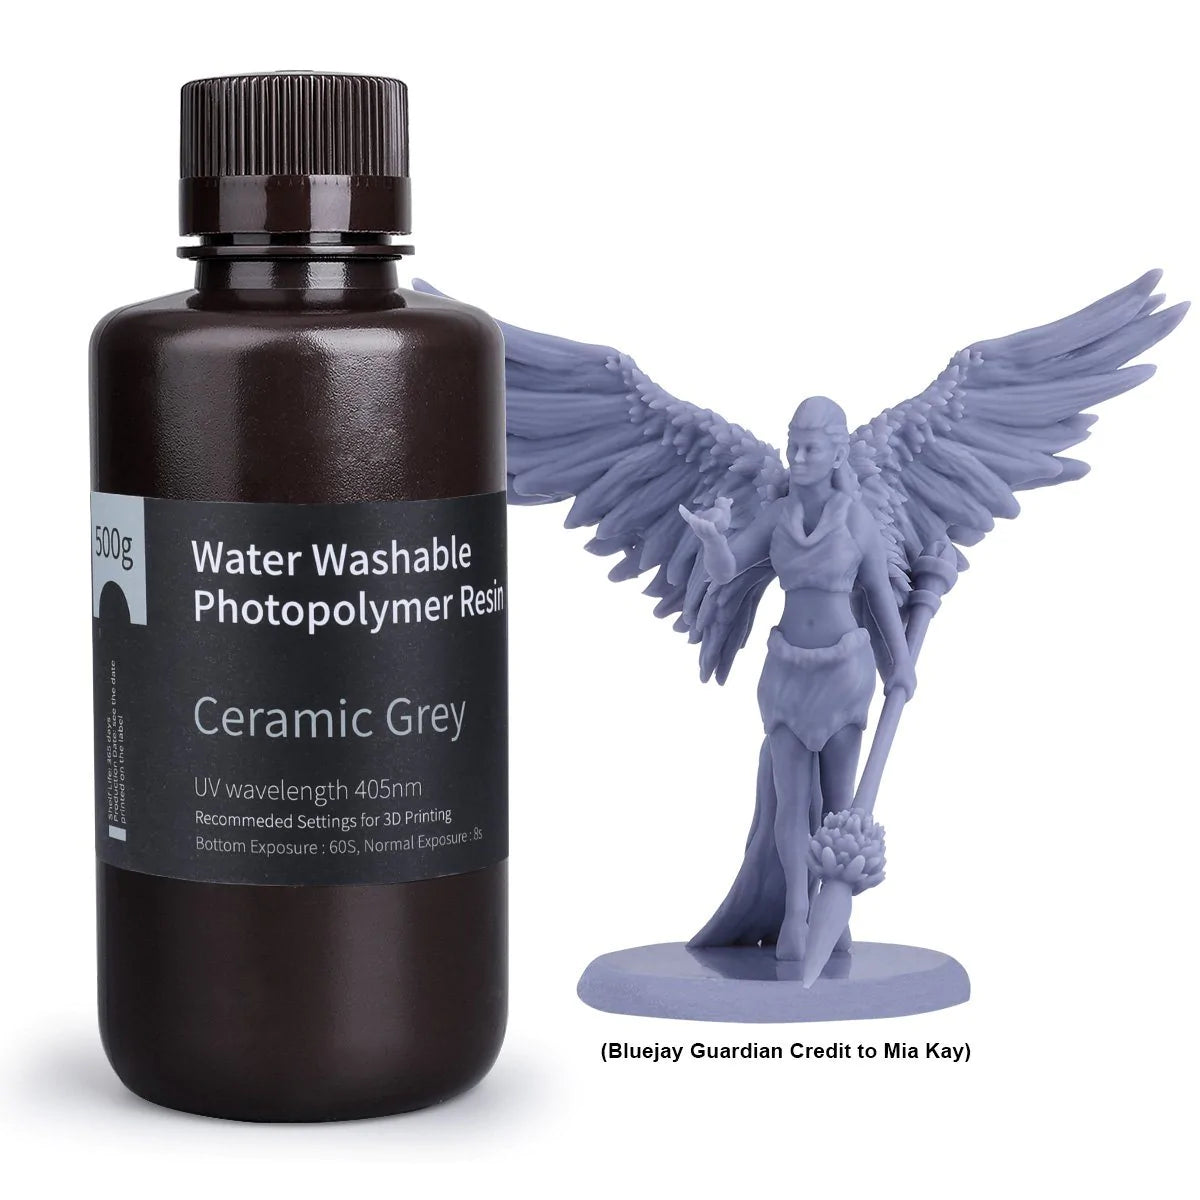 Print amazing 3D Models with UV Water Washable Resin from BC Hobbies, Shipping Across Canada